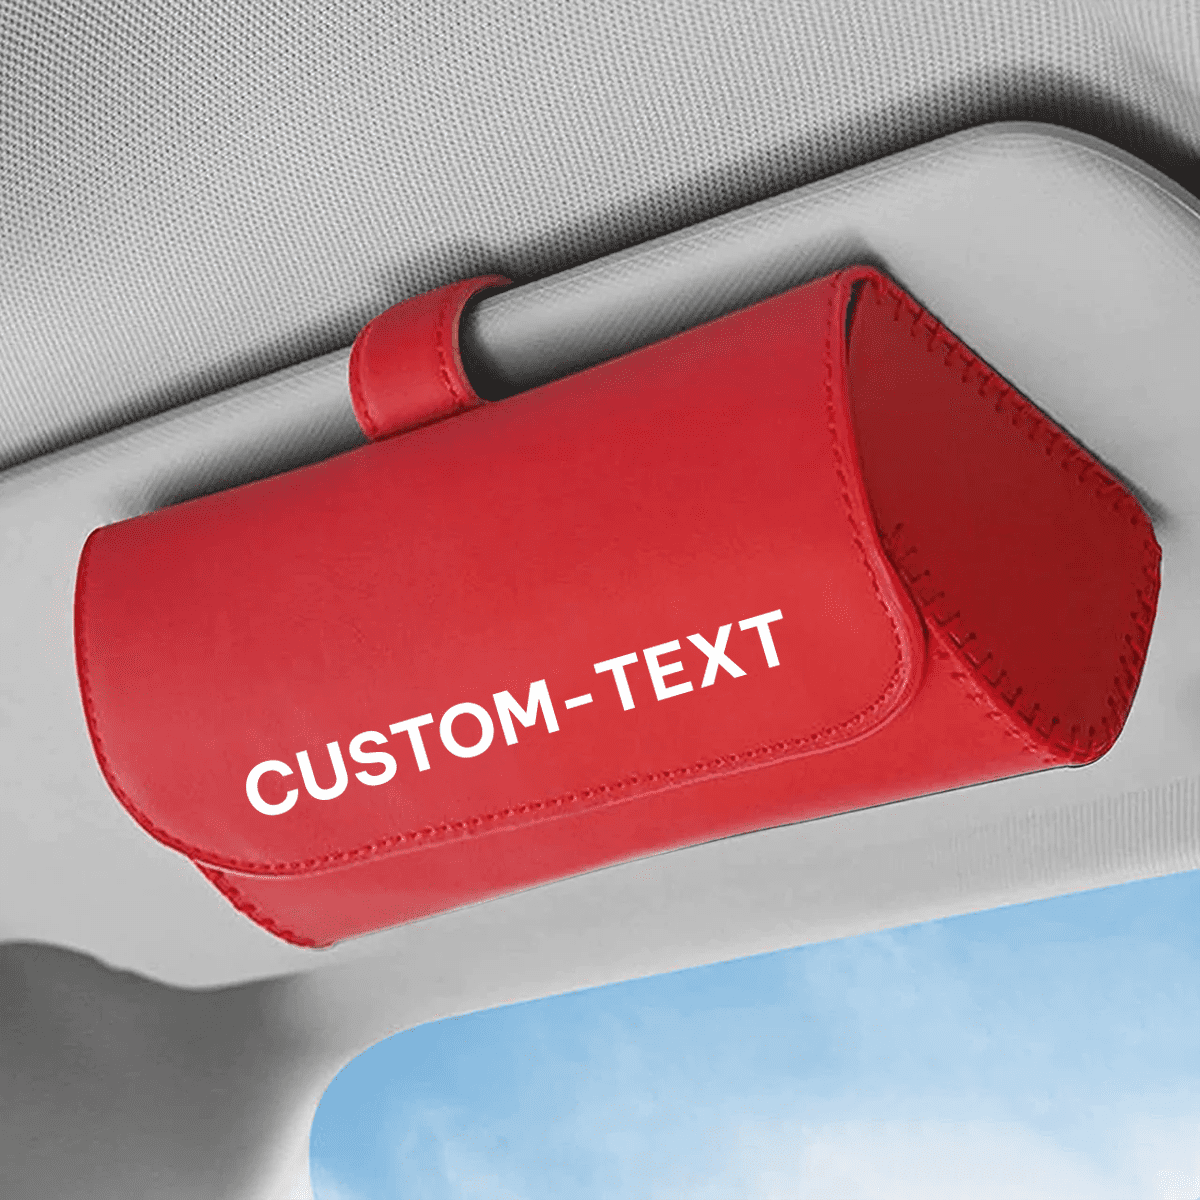 Custom Text and Logo Sunglasses Holder for Car Sun Visor, Fit with all car, Leather Glasses Storage Case, Vehicle Visor Accessories, Sunglass Holder Organizer Box - Delicate Leather